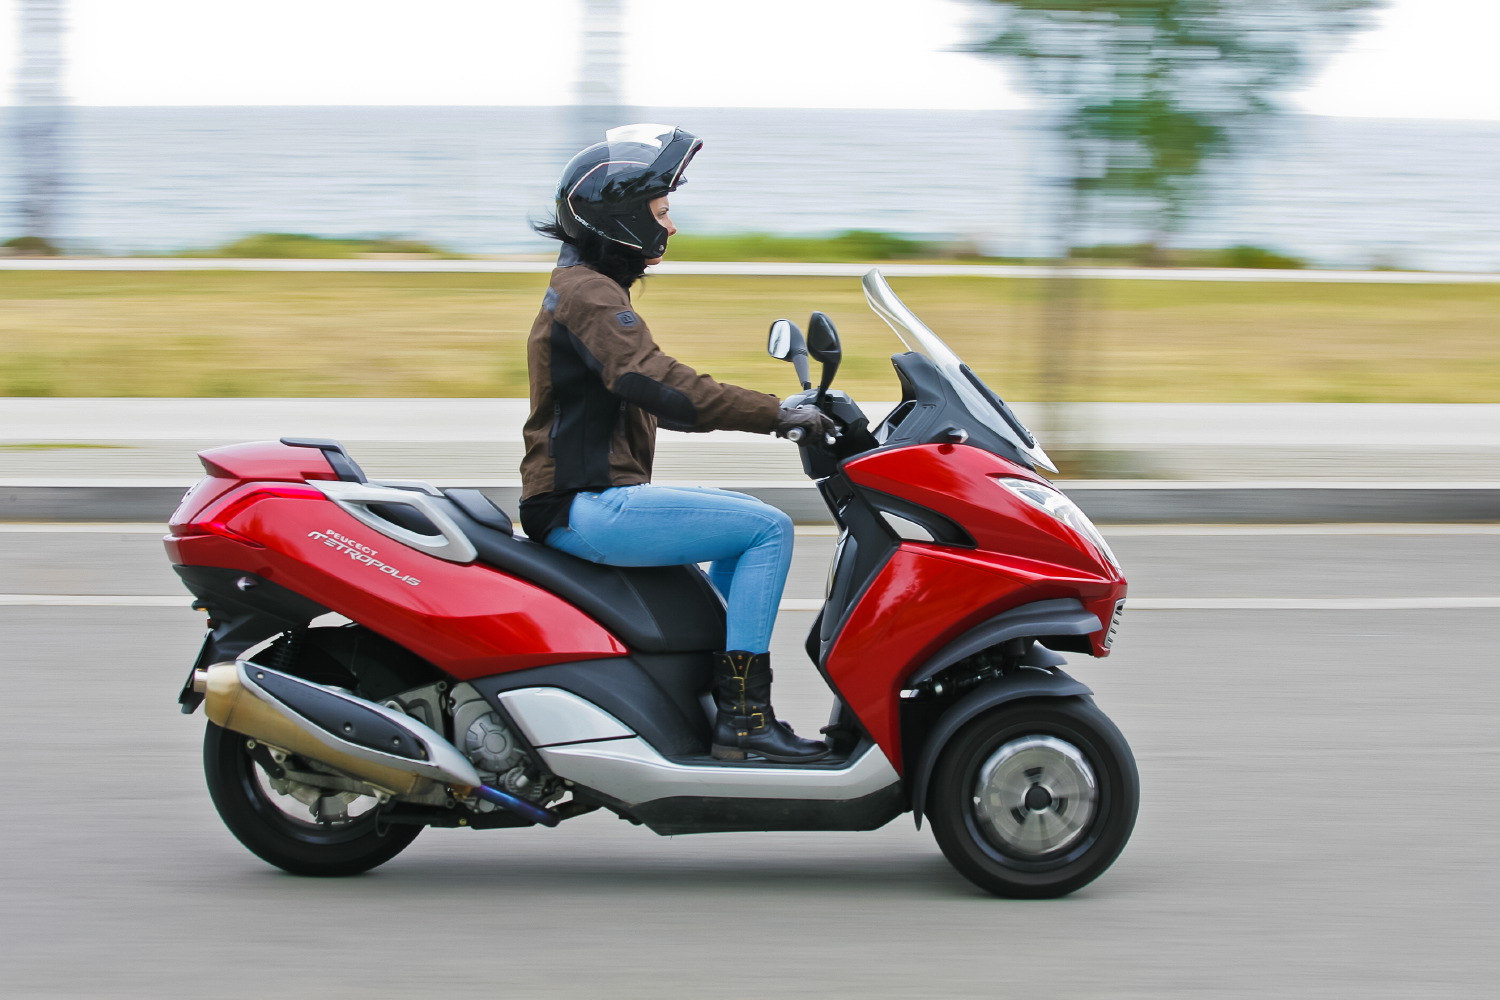 Motorcycle: peugeot - metropolis 400i rx r 13 abs(2020) scooter specifications, characteristics and information